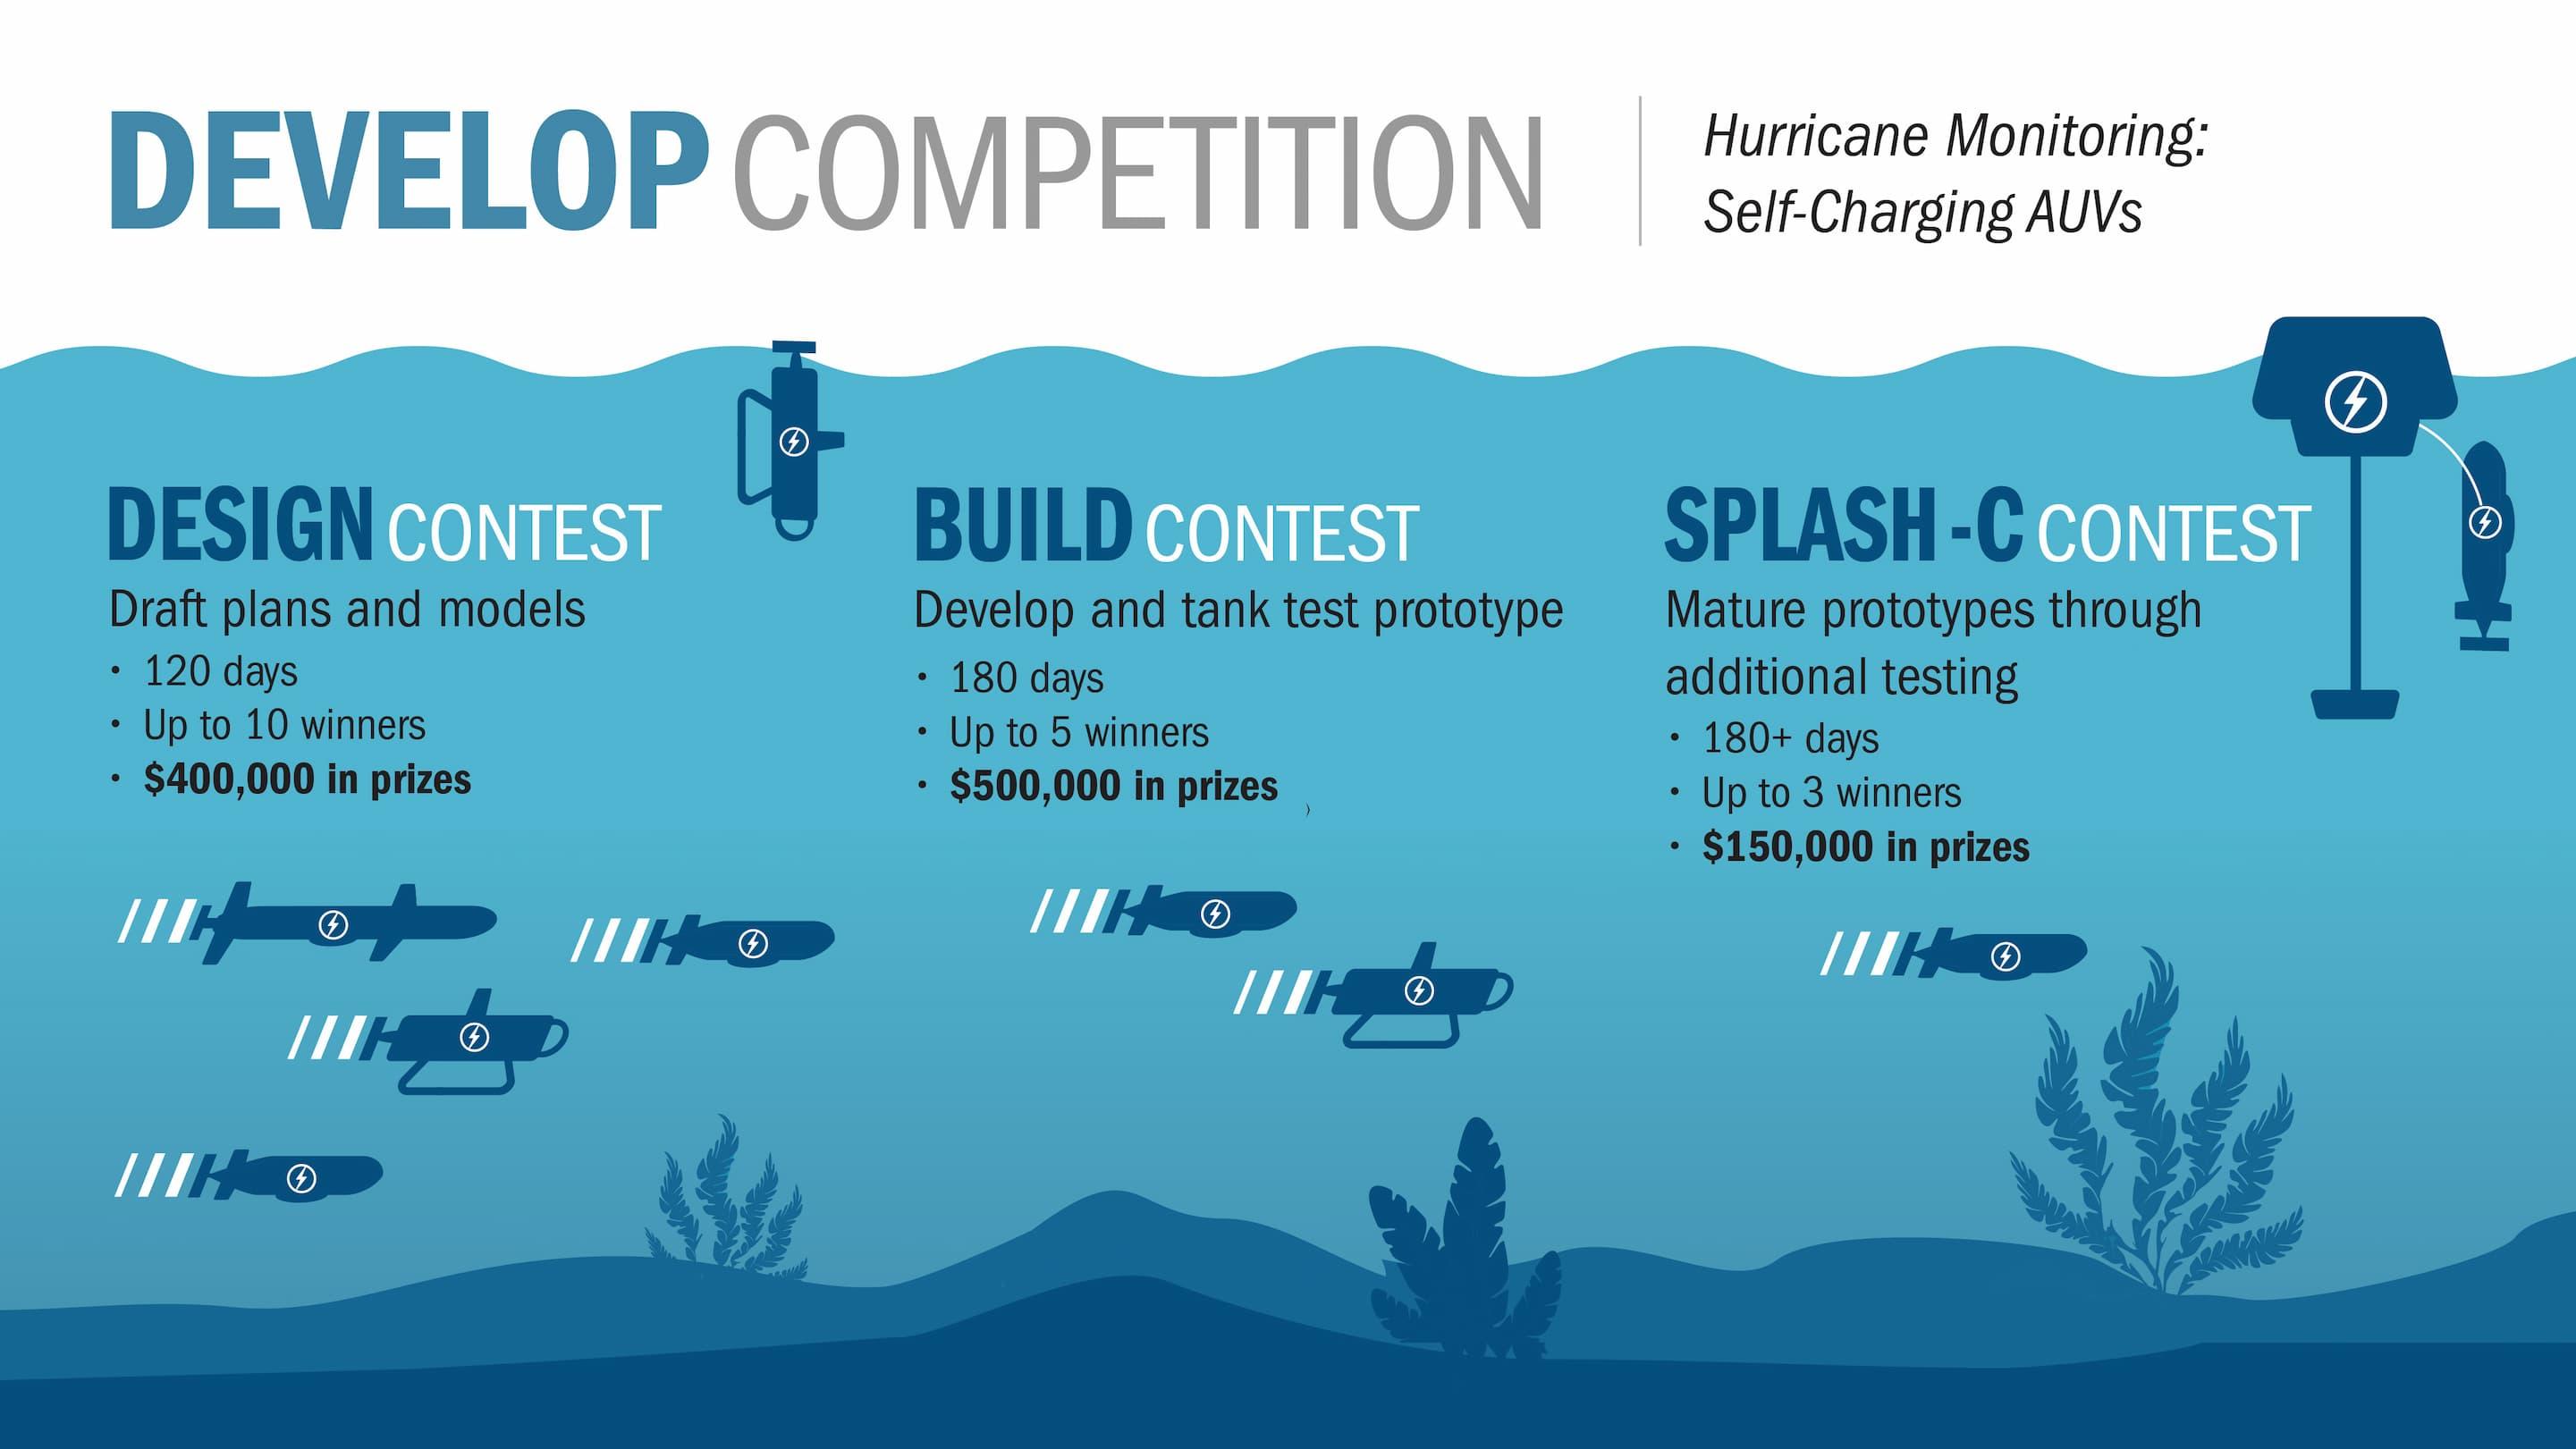 Graphic of the Ocean Observing Develop Competition for hurricane monitoring using self-charging AUVs. Design Contest - draft plans and models - 120 days, Build Contest - develop and tank test prototype - 180 days, Splash Contest - test prototypes at sea - 90+ days.